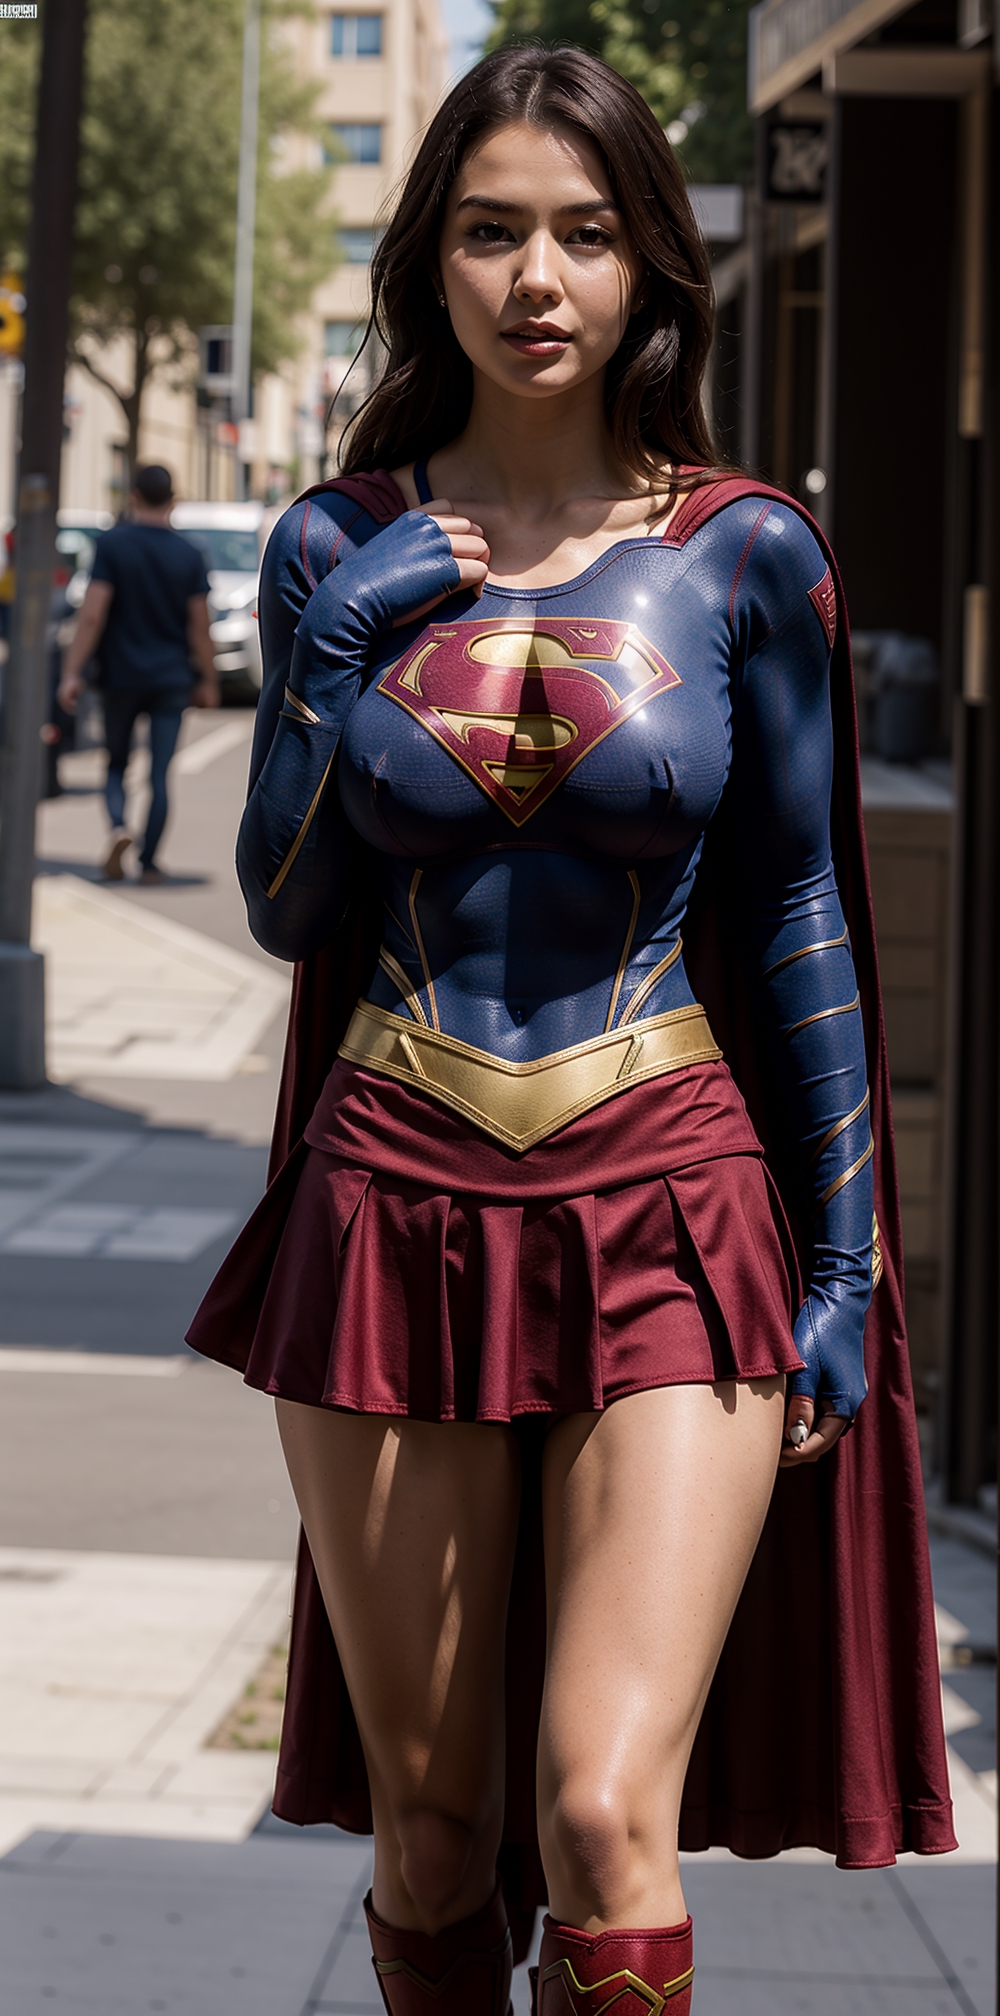 Supergirl with big boobs